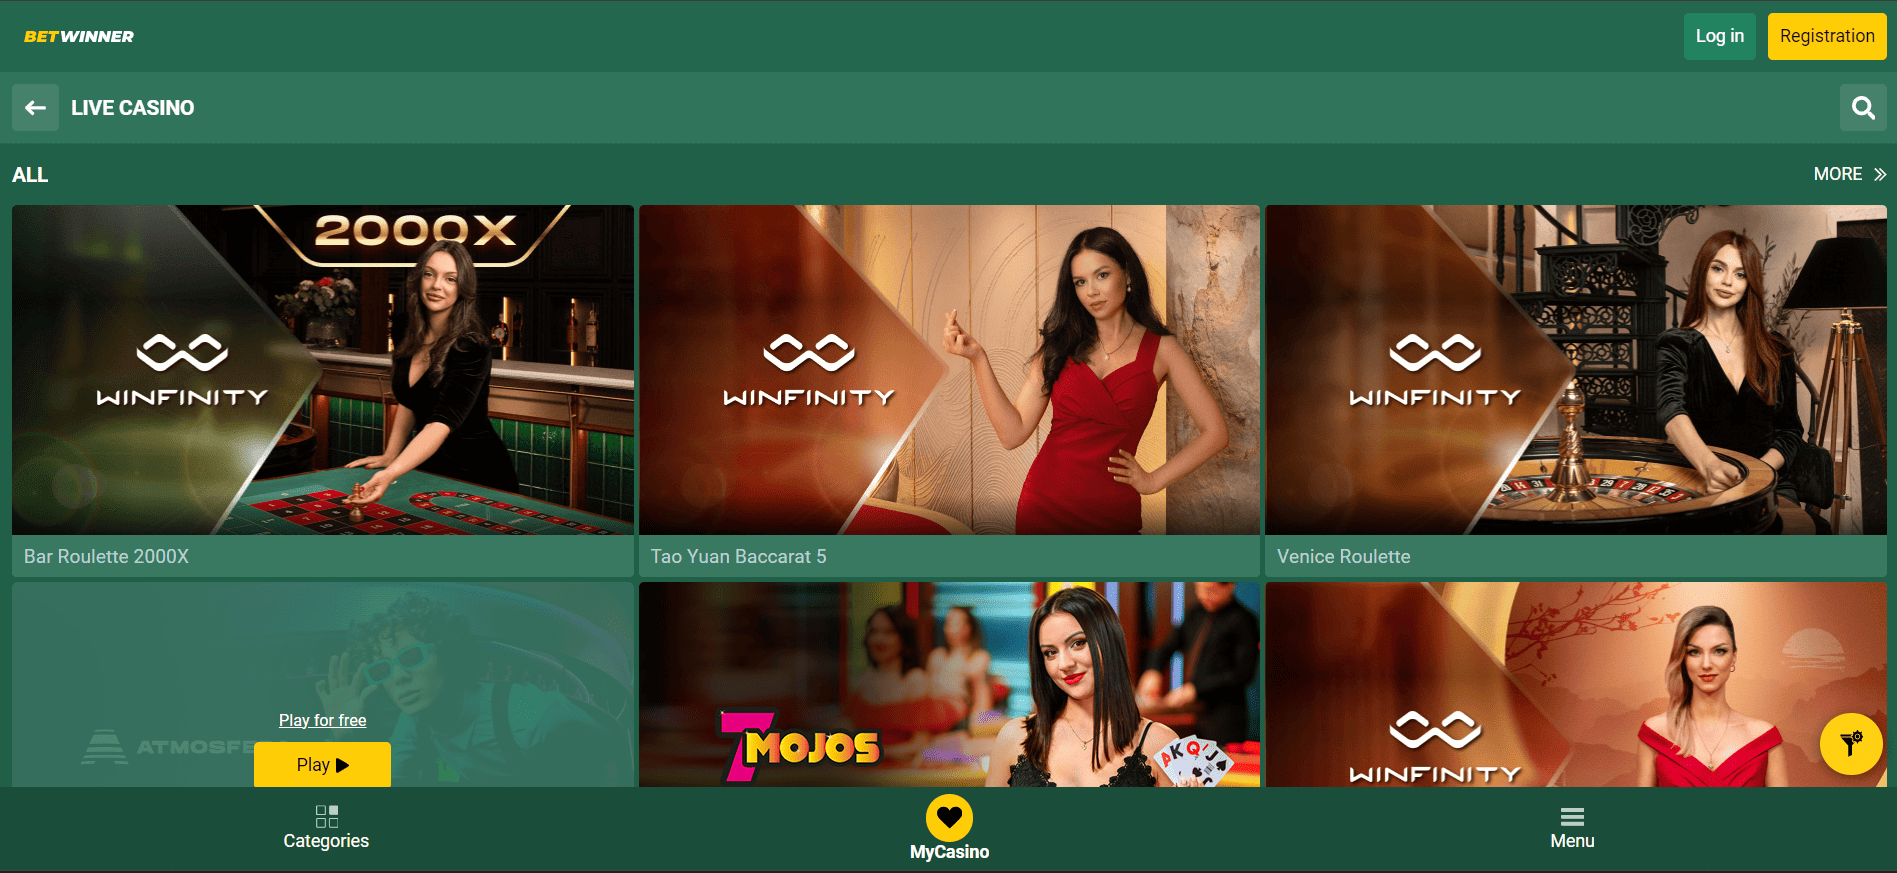 Image for Betwinner Live Casino